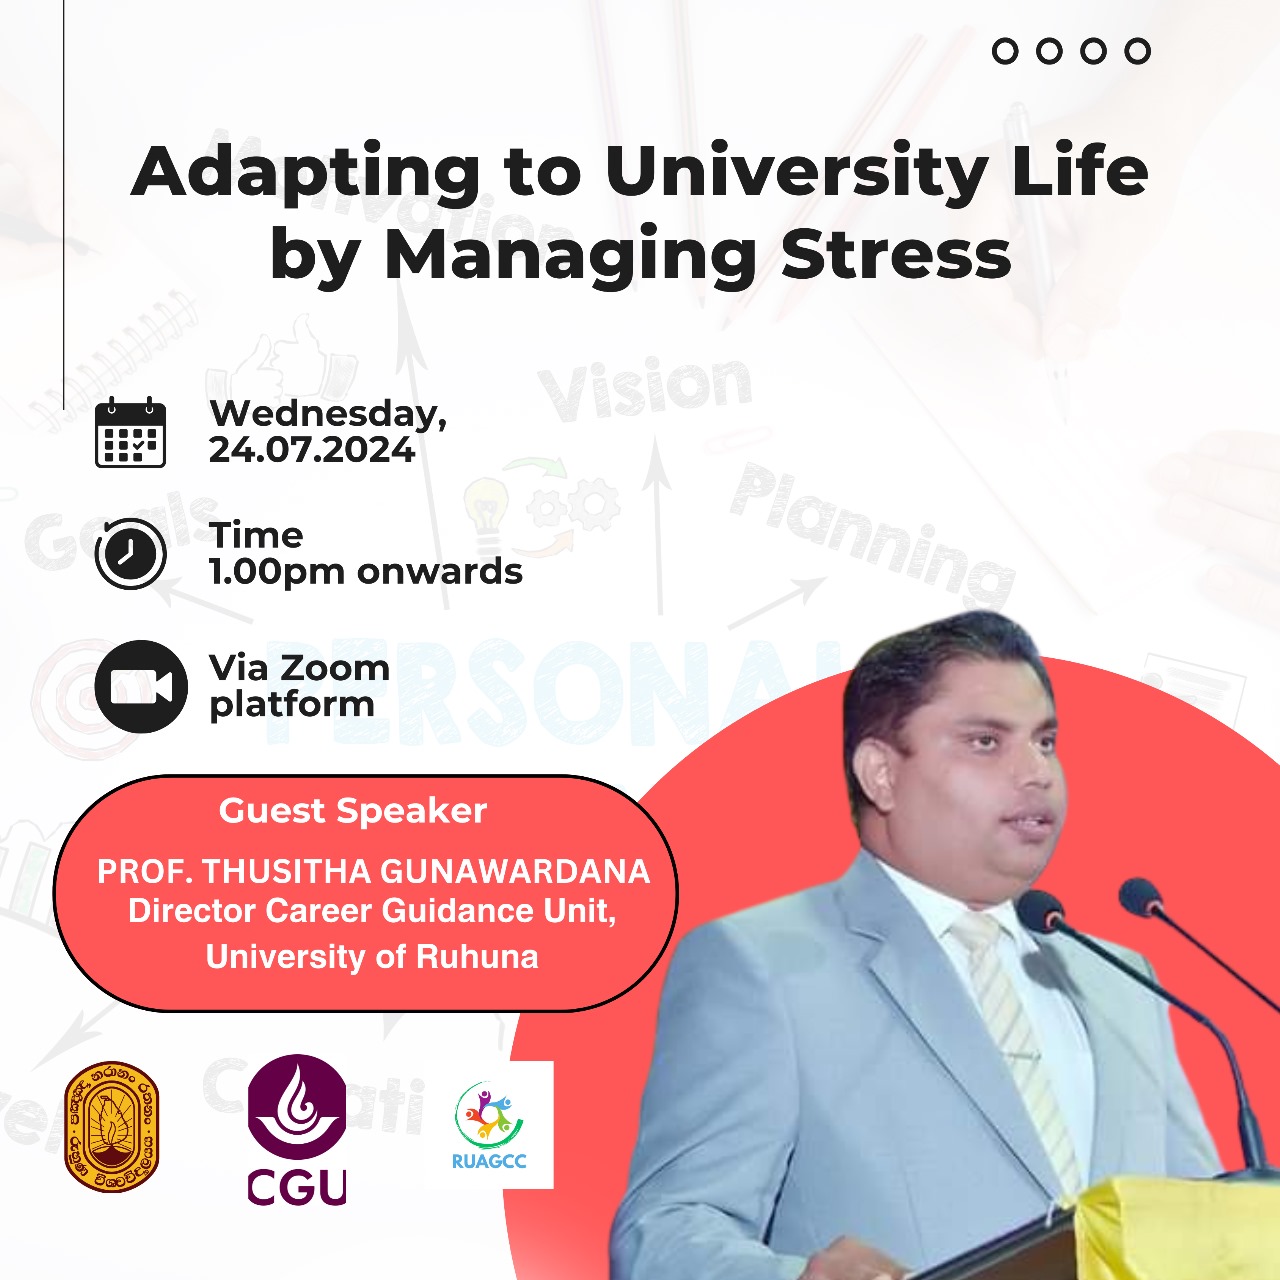 Adapting to University Life by Managing Stress